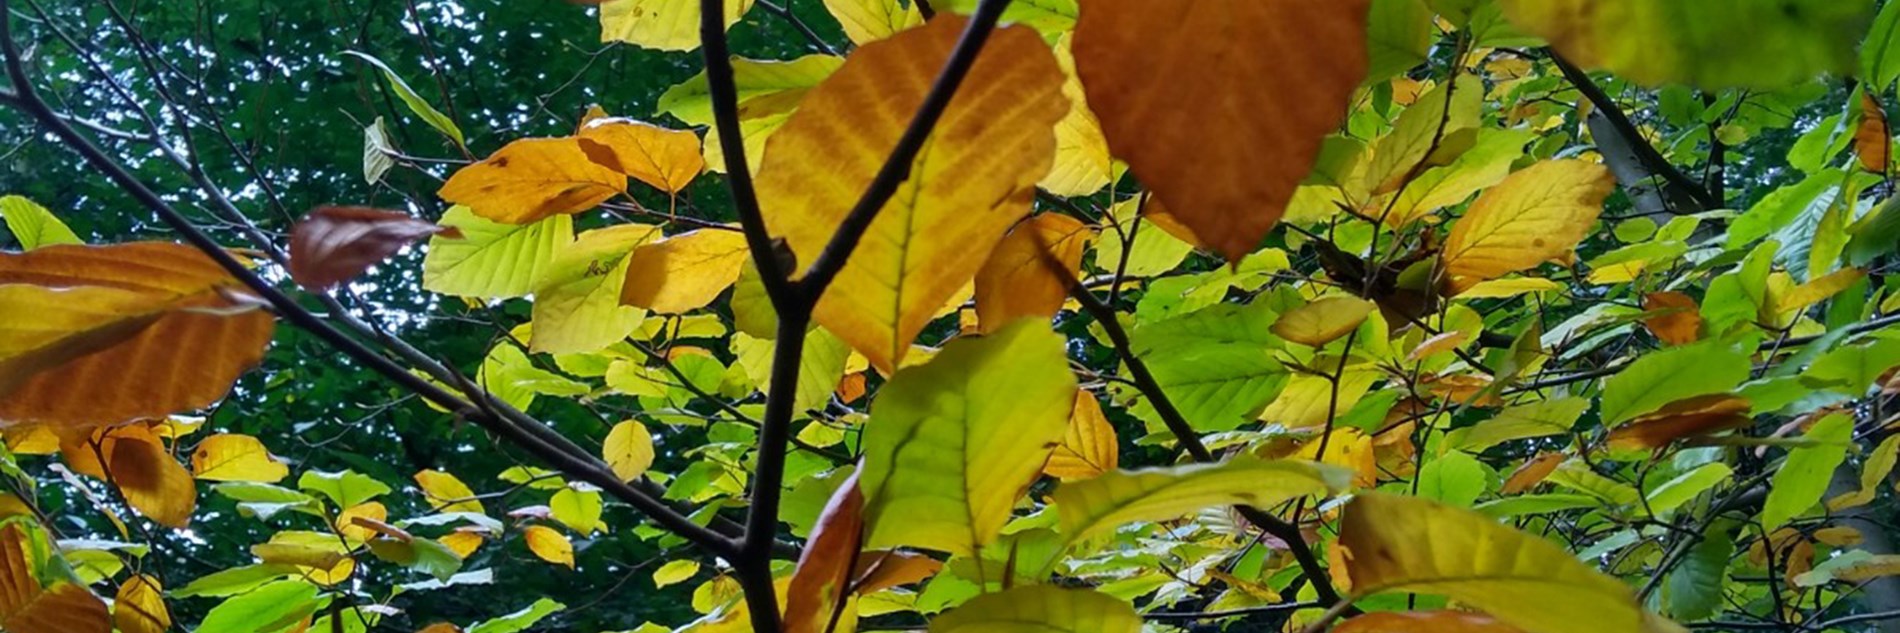 A close up photograph of a tree with orange, green and brown leaves 